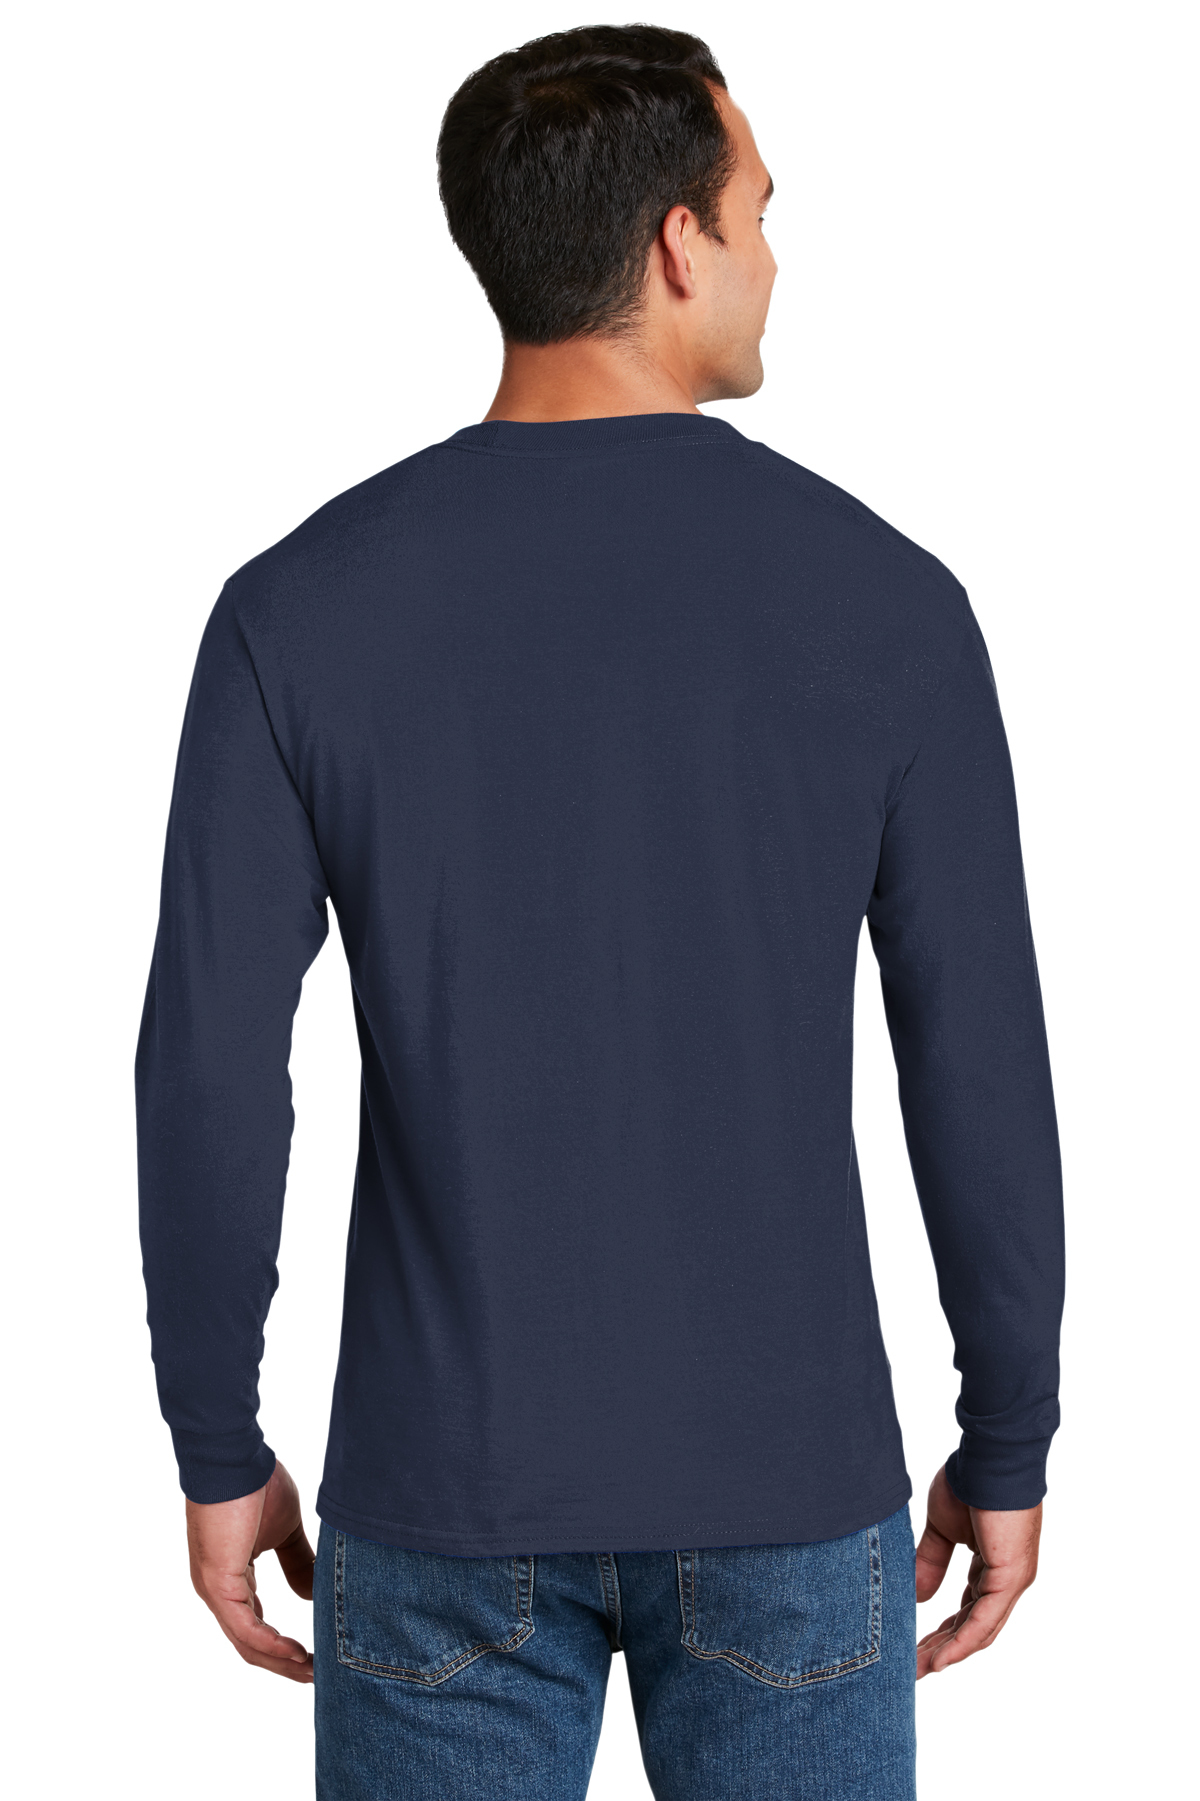 Hanes Beefy-T - 100% Cotton Long Sleeve T-Shirt | Product | SanMar